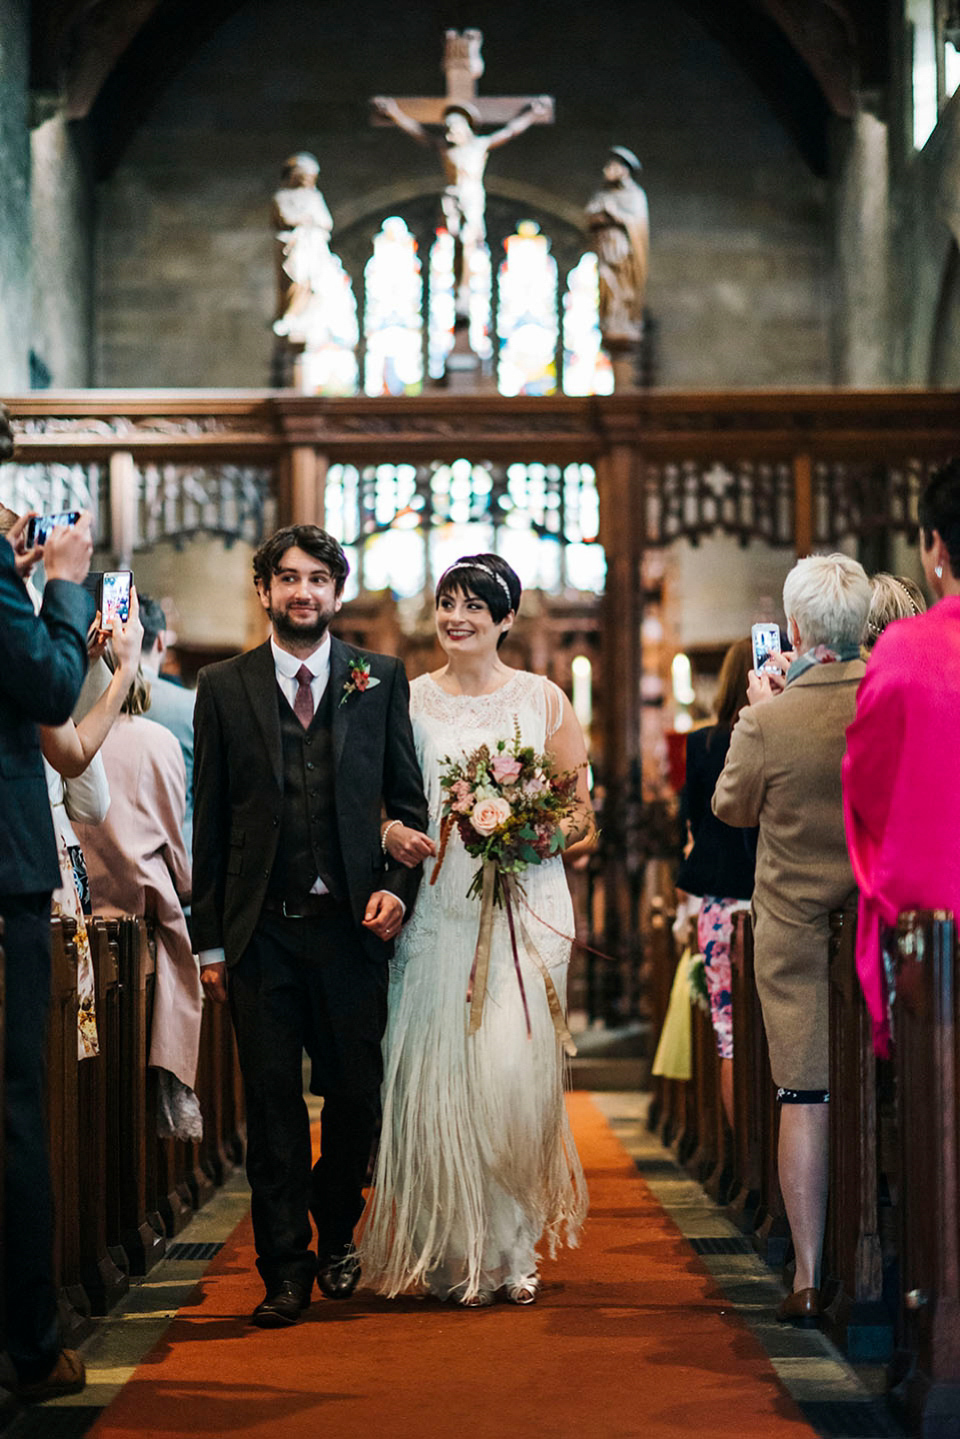 Hayley wore a 1920s tasseled dress by Phase Eight for her Autumn Wedding. Photography by Kerry Woods.